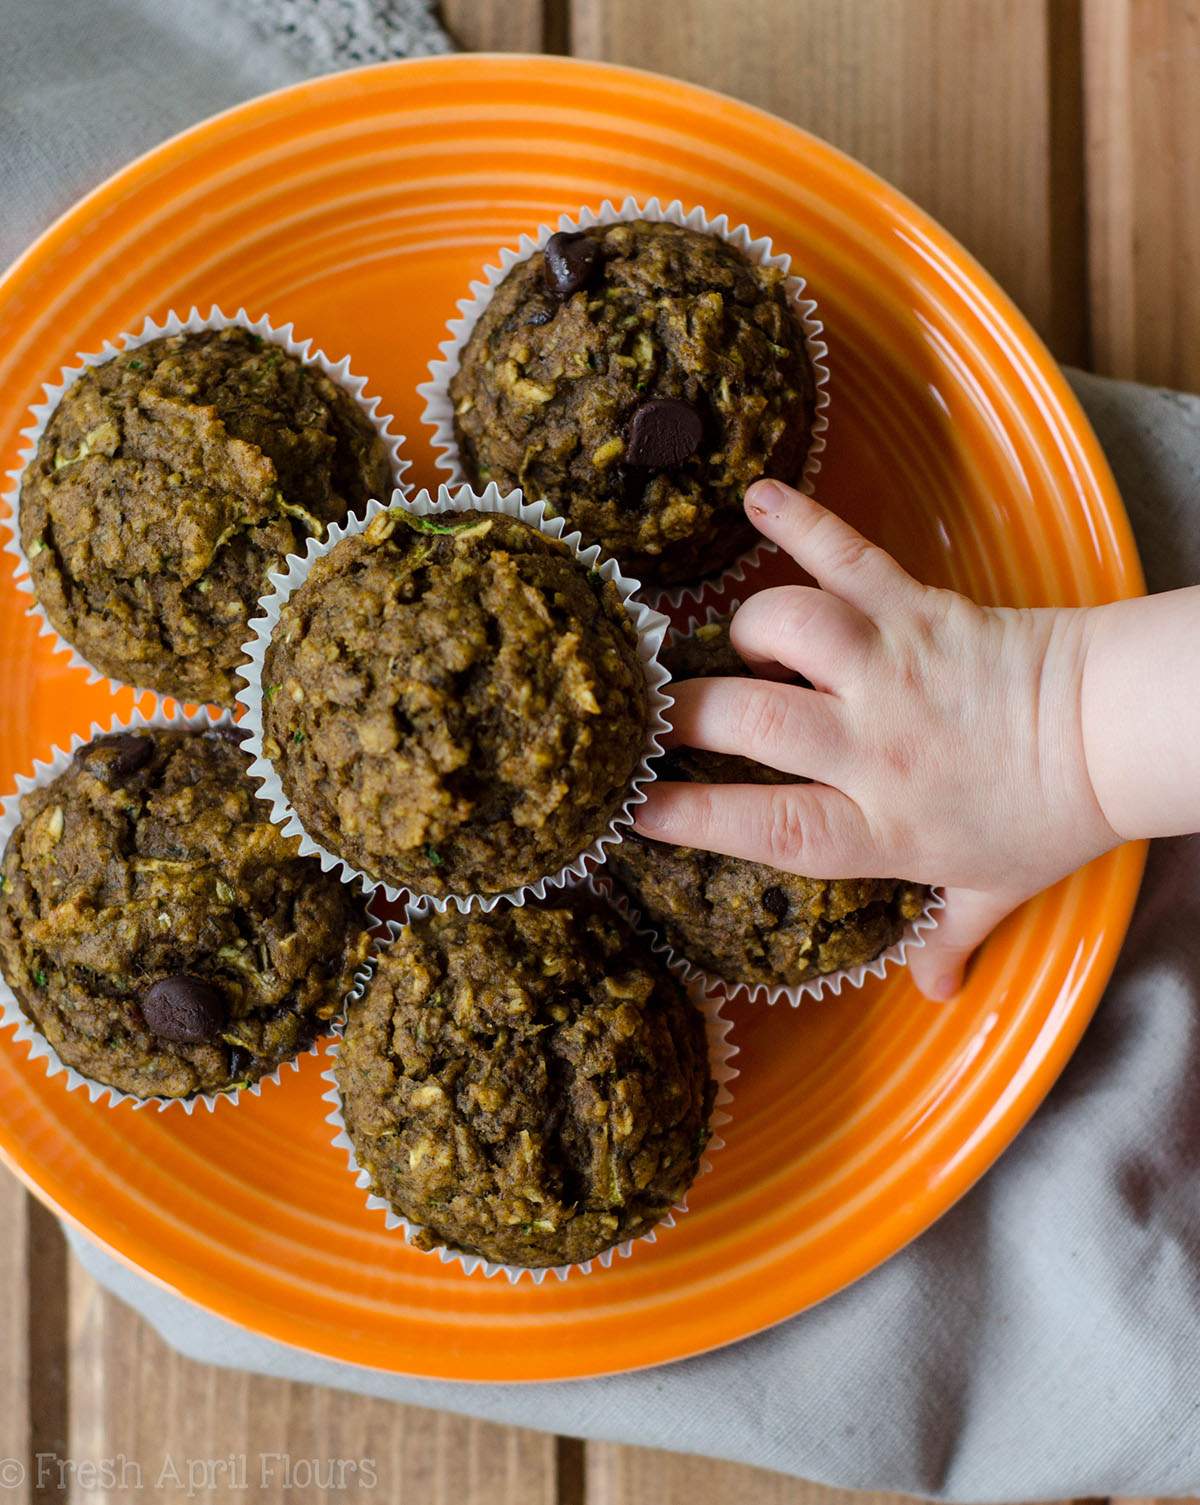 Toddler Muffins: Whole wheat muffins made with shredded zucchini and pureéd pumpkin, sweetened with mashed bananas, applesauce, and minimal sugar. Suitable for toddlers, children, and adults!